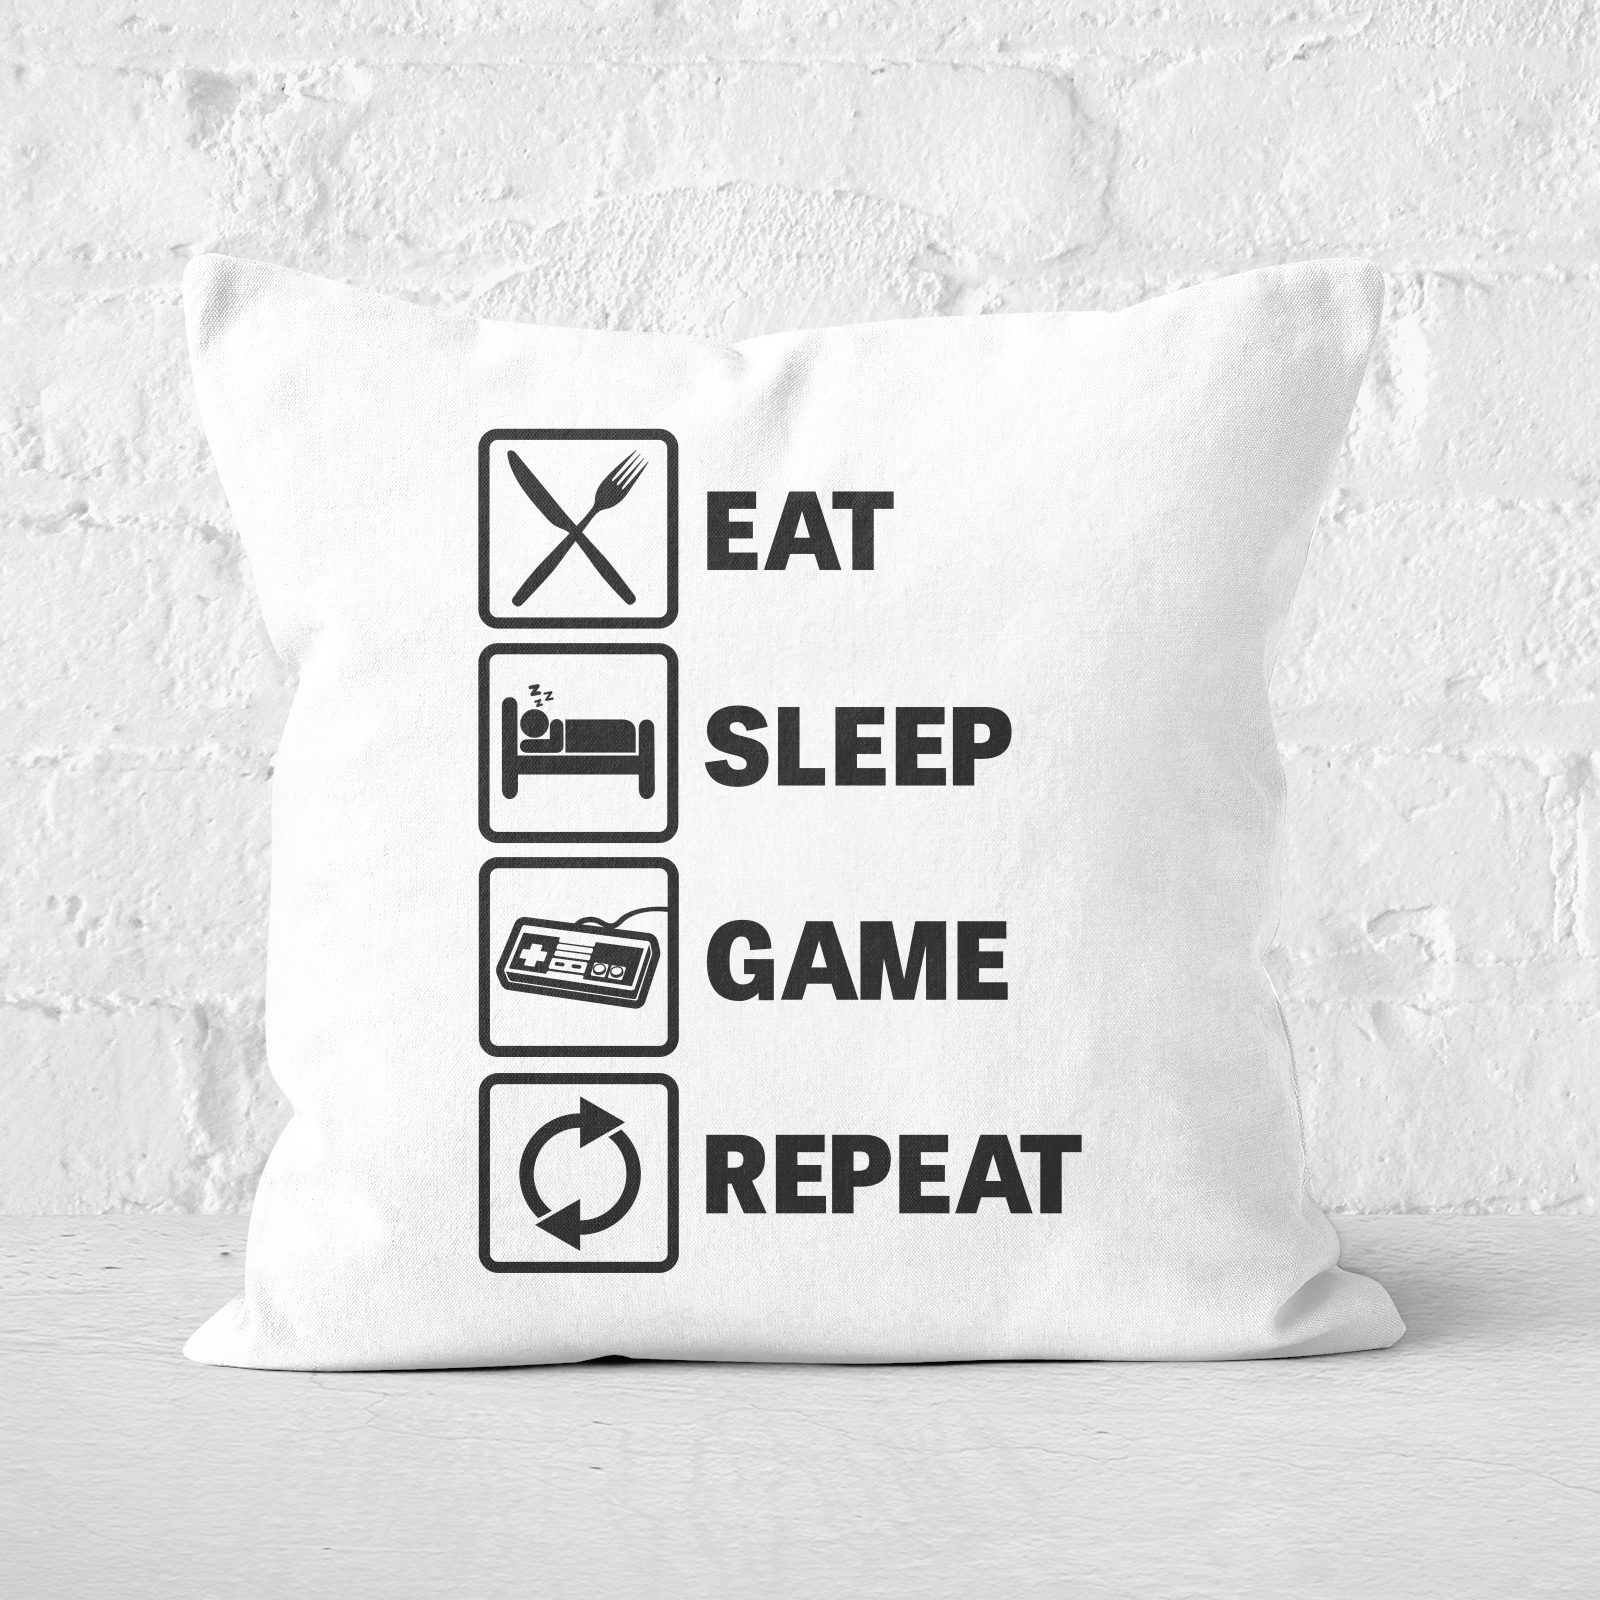 Eat Sleep Game Repeat Square Cushion - 60x60cm - Soft Touch